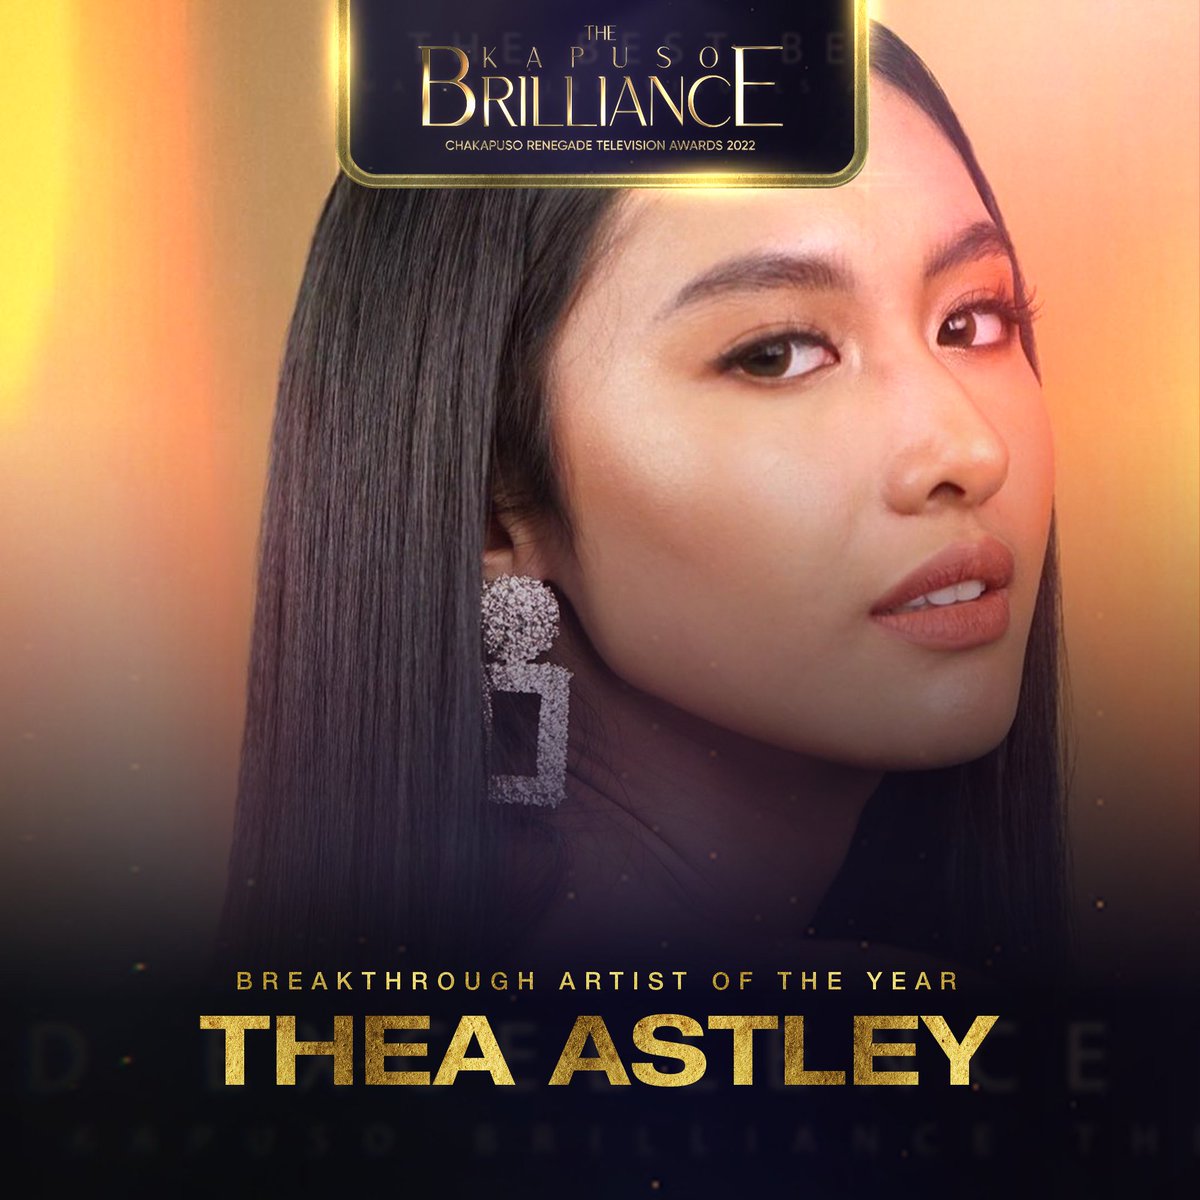 Breakthrough Kapuso Artist of the Year: Thea Astley

@theaastley rose to prominence in the industry after lending her soulful voice to the soundtracks of some GMA's programs. She currently slays and dominates in #AllOutSundays' #Queendom.

#TheKapusoBrilliance | CKR TVAwards2022